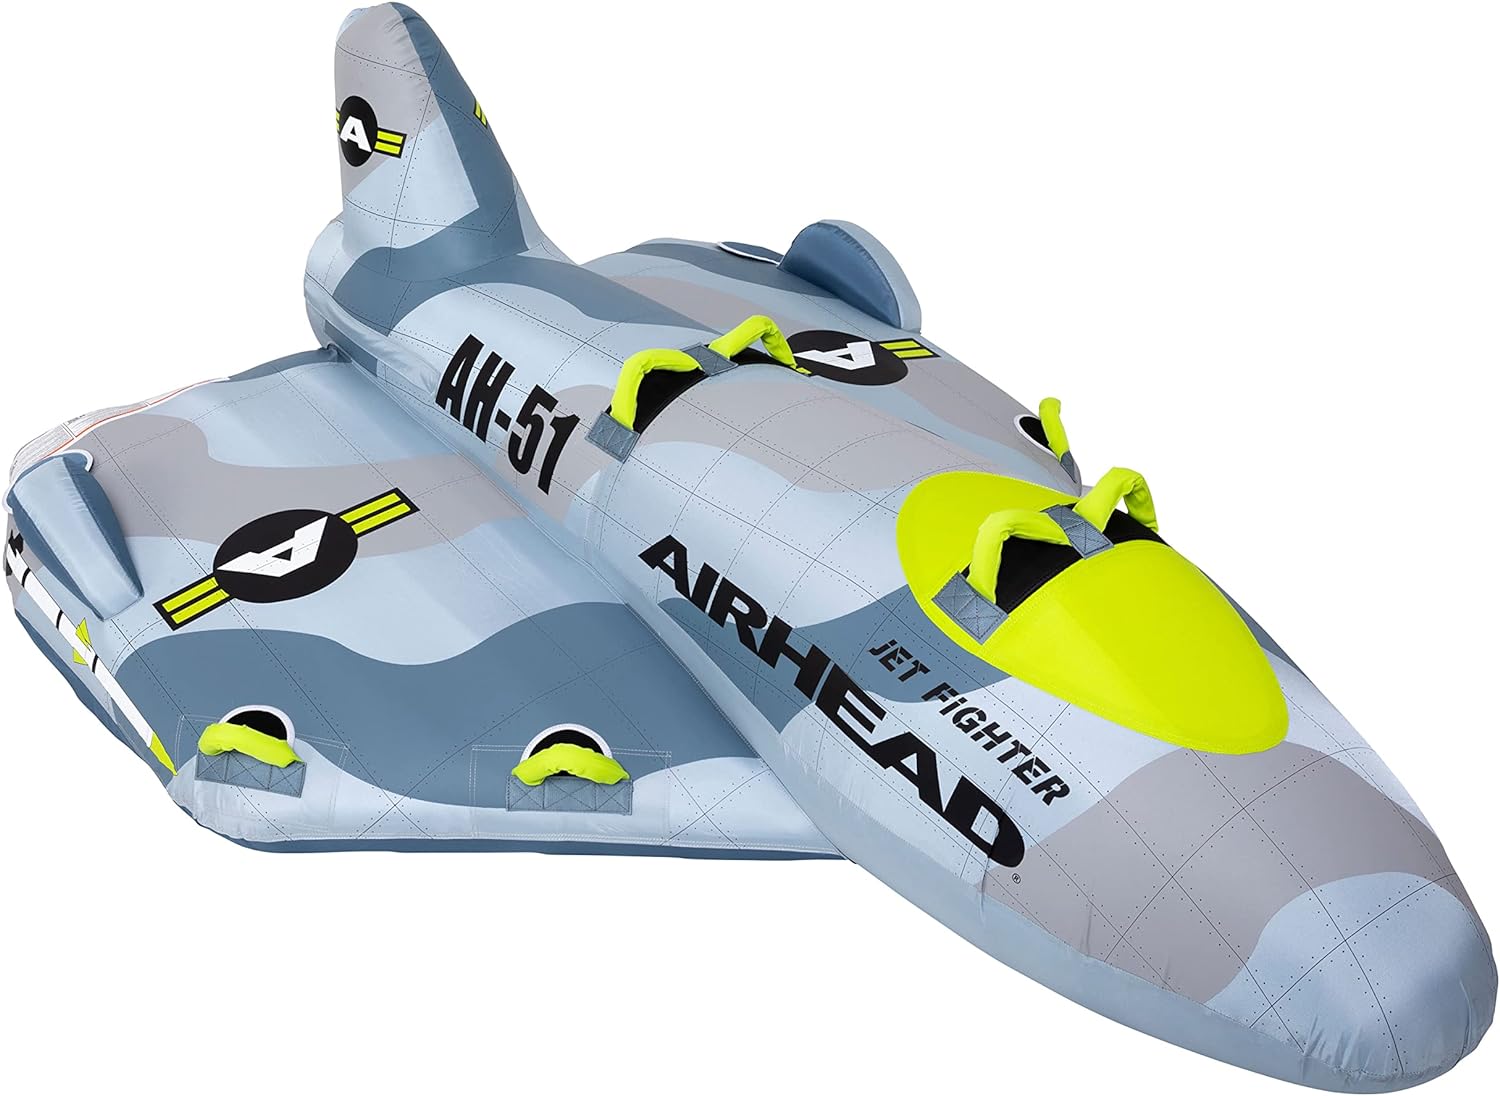 Airhead Jet Fighter | 1-4 Rider Towable Tube for Boating